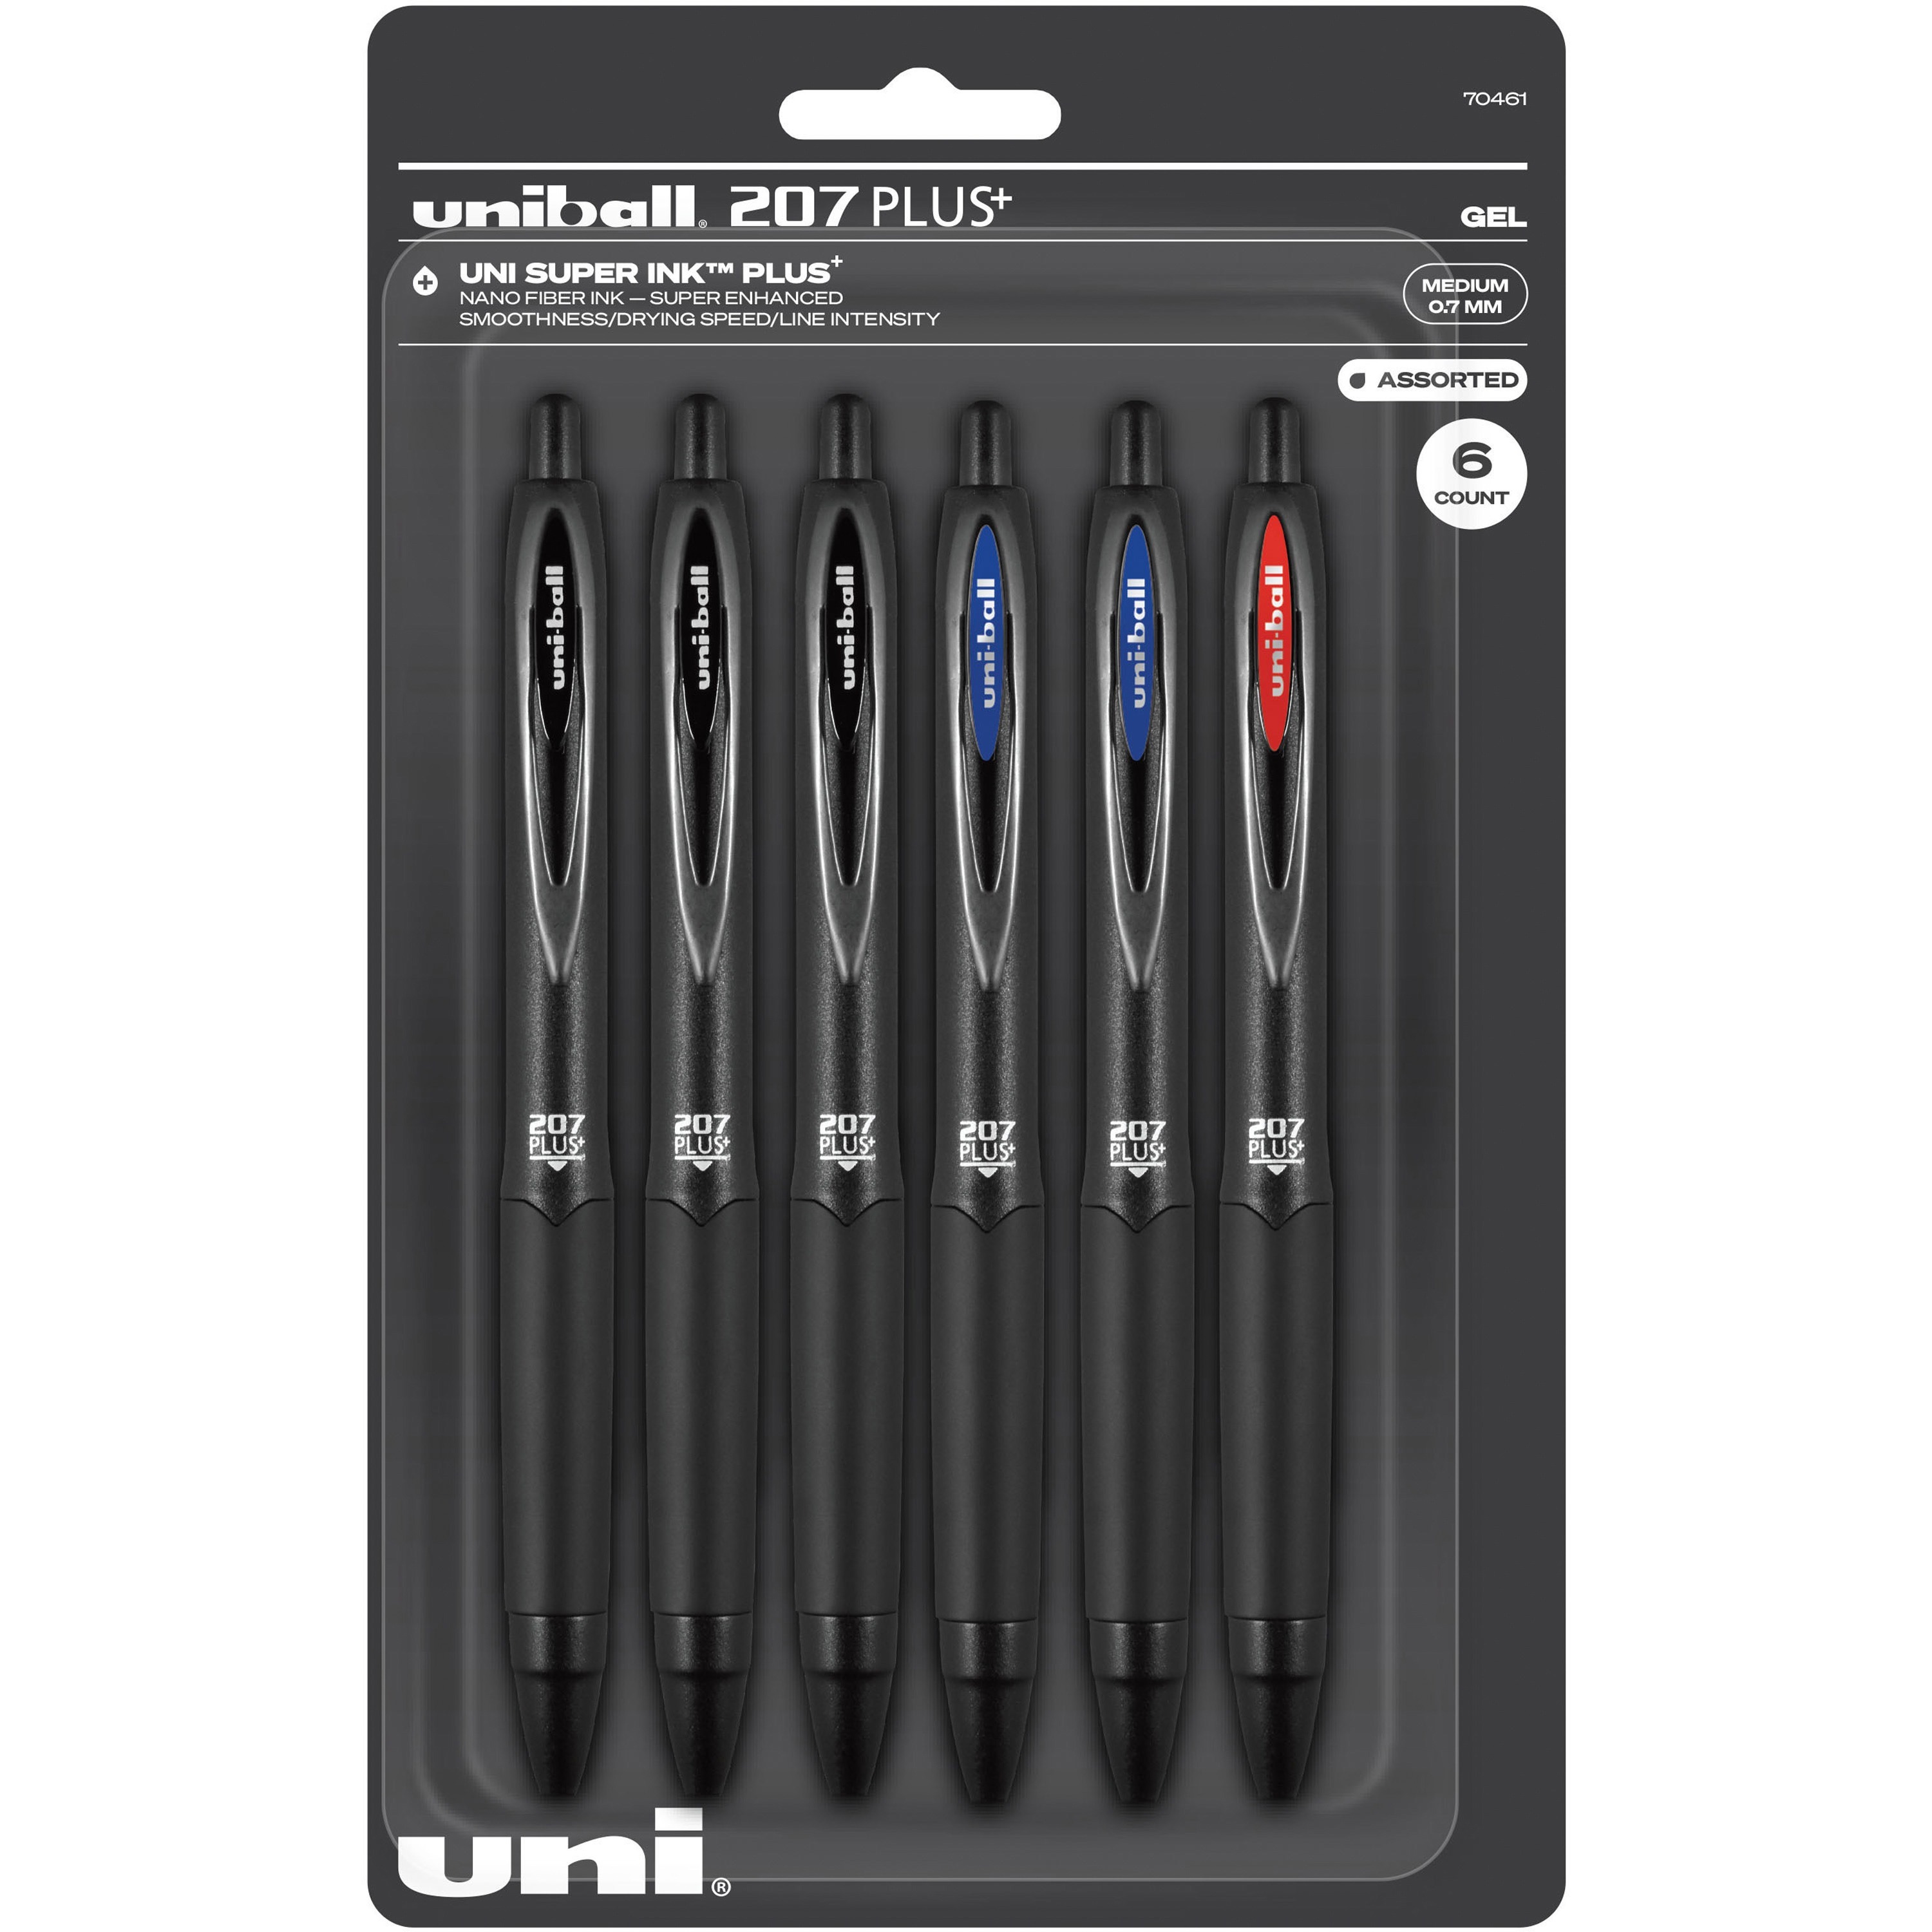 Uniball Signo 207 Gel Pen 4 Pack, 0.7mm Medium Assorted Pens, Gel Ink Pens  | Office Supplies Sold by Uniball are Pens, Ballpoint Pen, Colored Pens